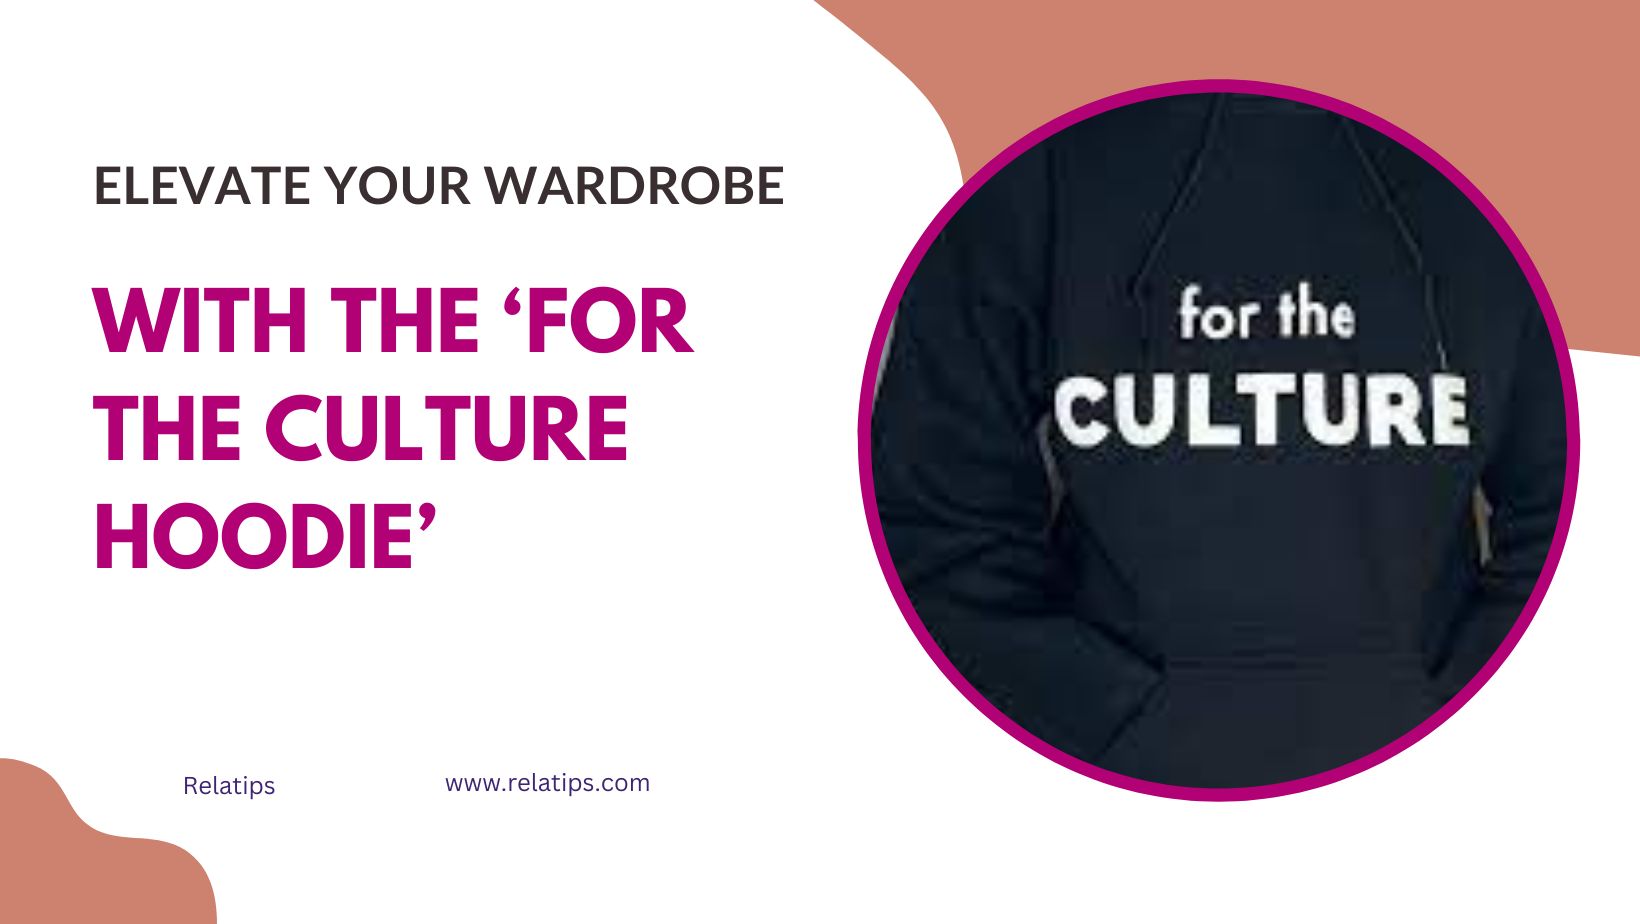 Elevate Your Wardrobe With the For the Culture Hoodie